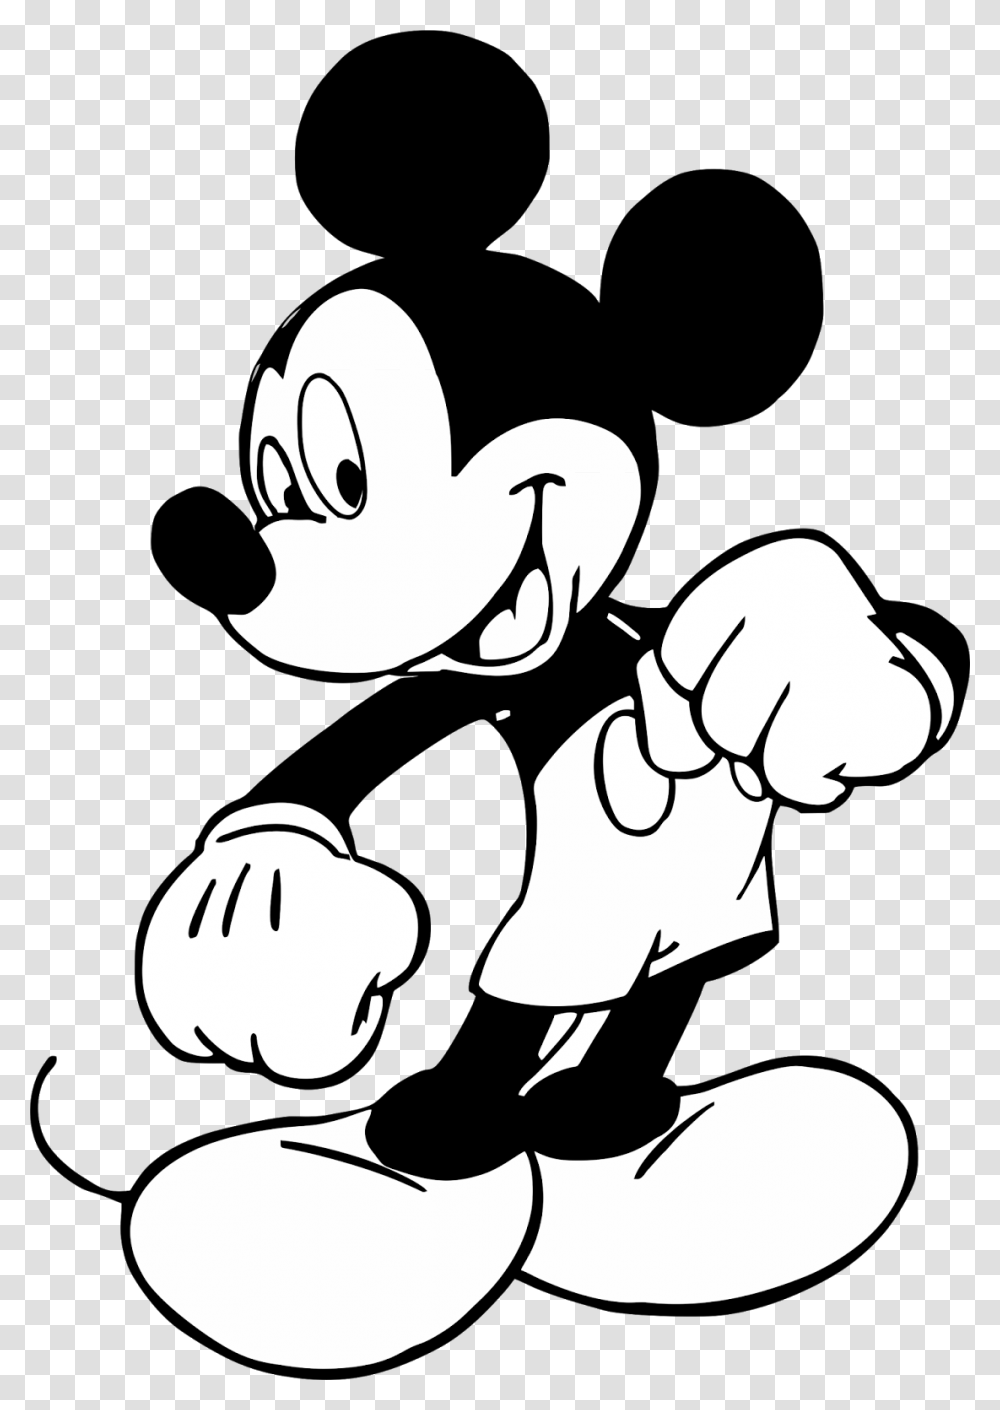 Download Vektor Mickey Mouse Hd Format Dodo Grafis Disney Characters Colouring Pages, Stencil, Hand, Drawing Transparent Png